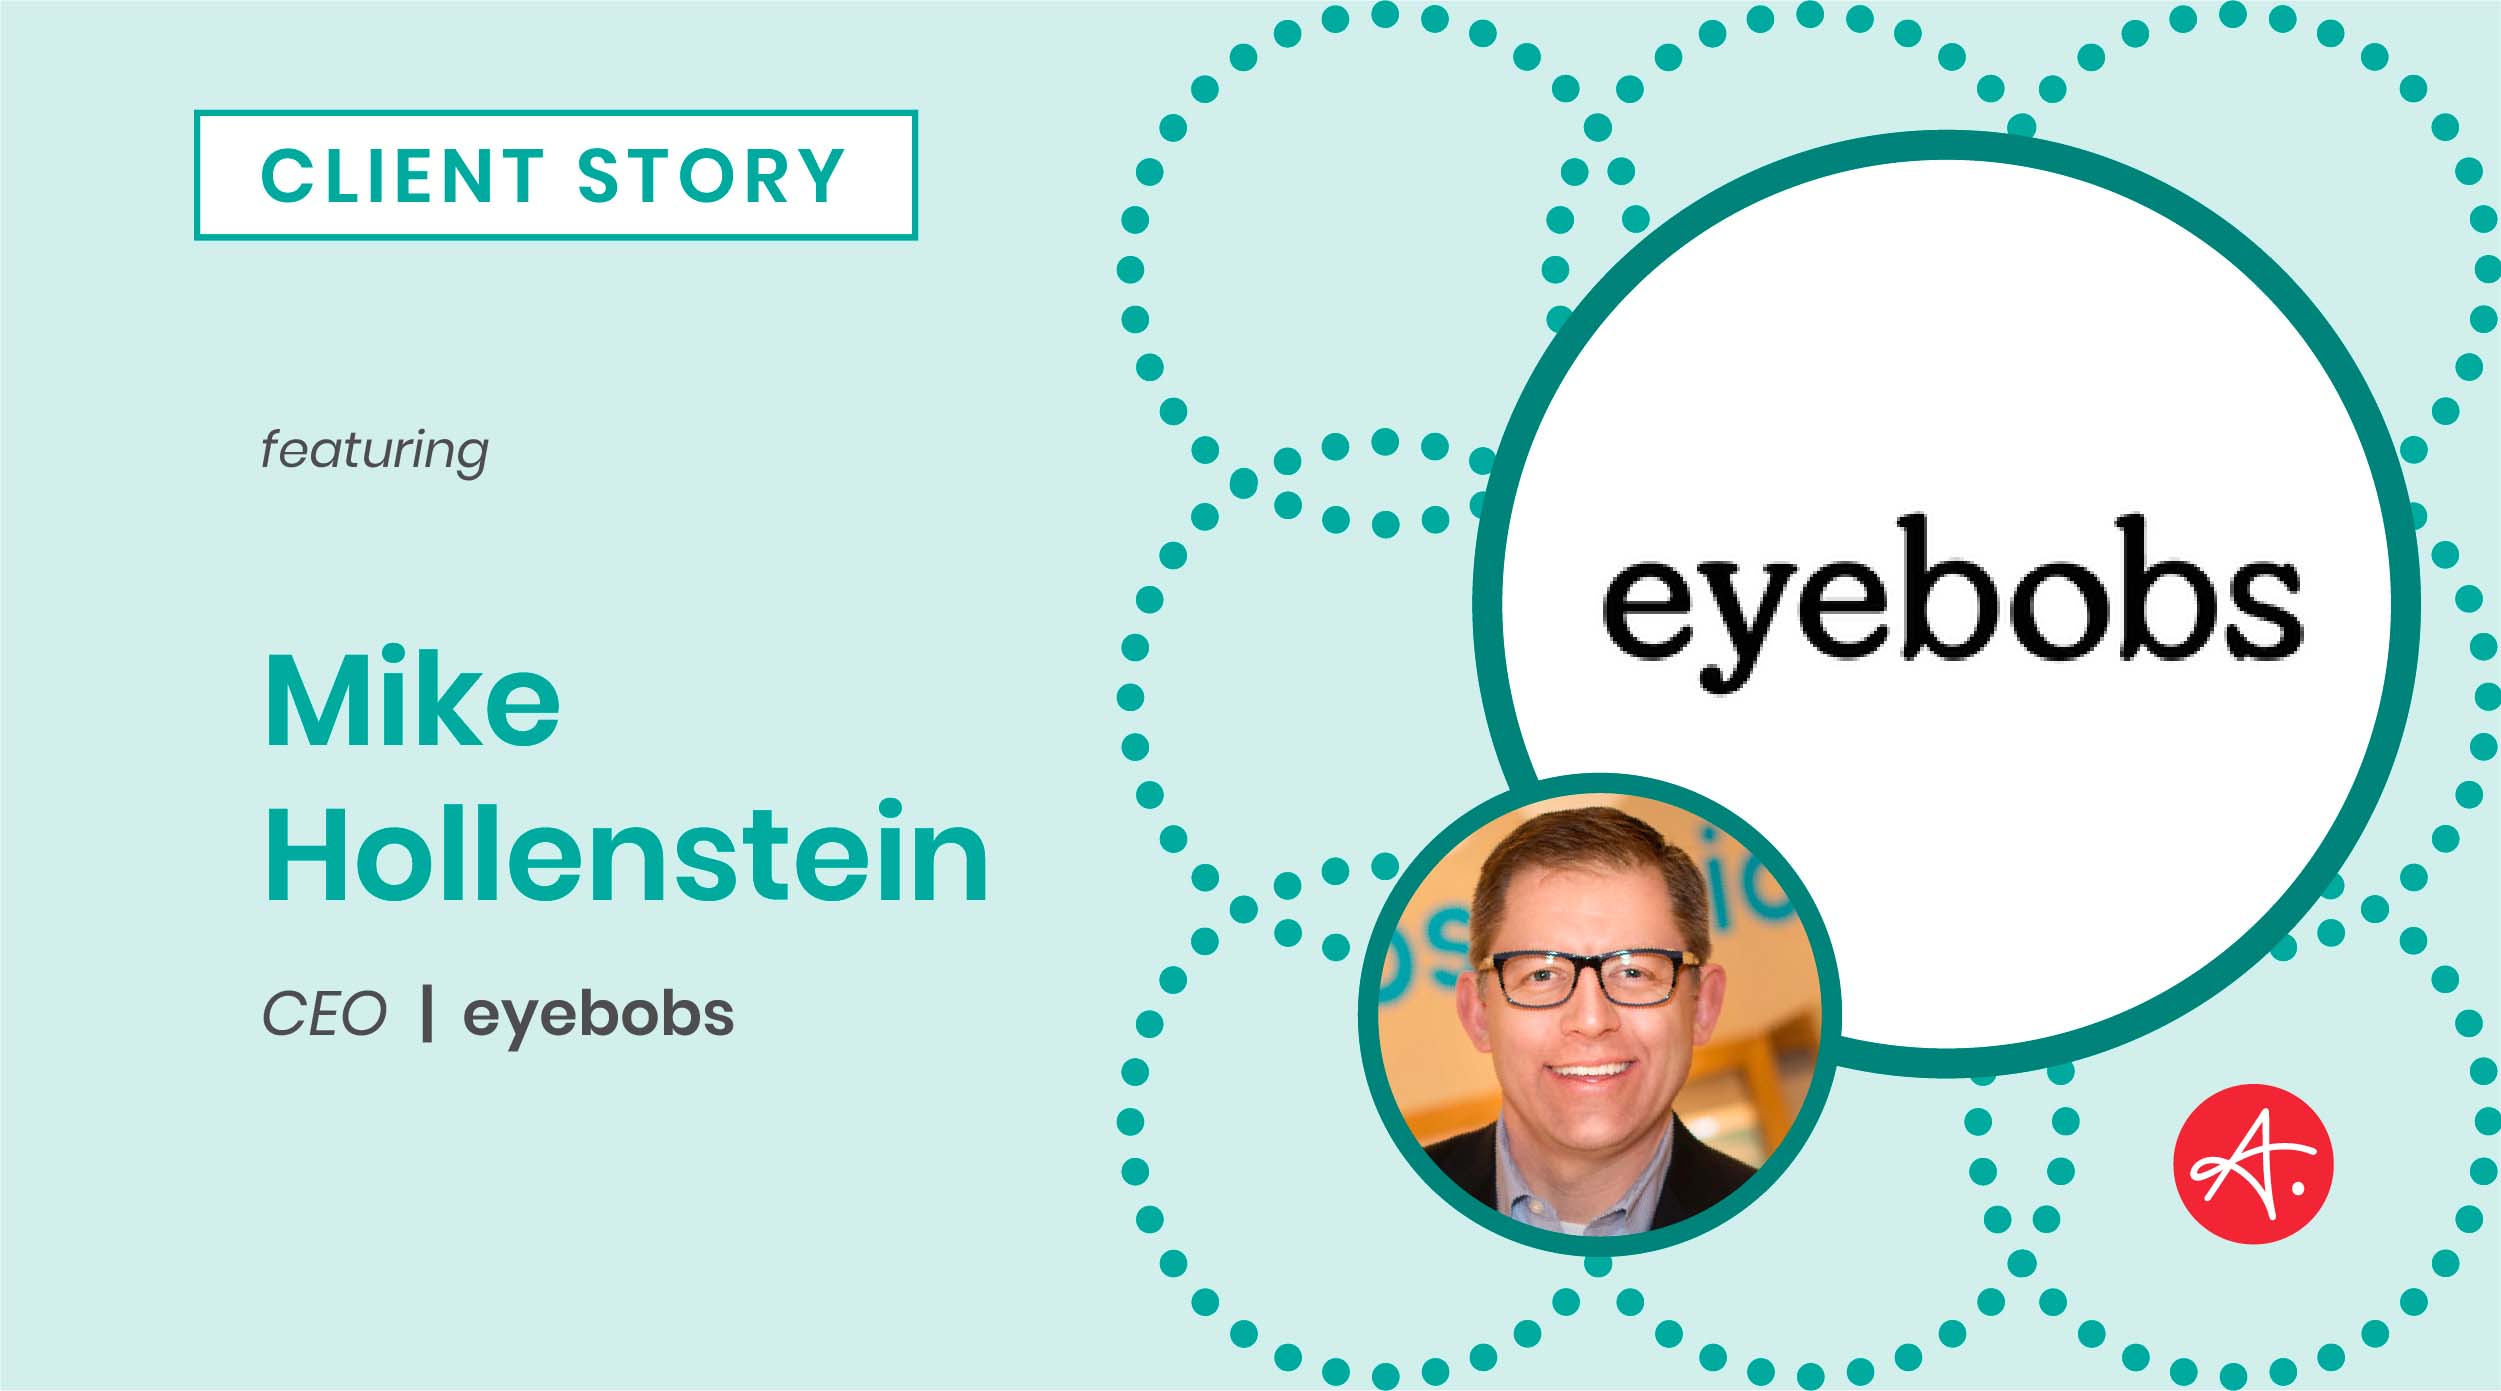 eyebobs: Client Story